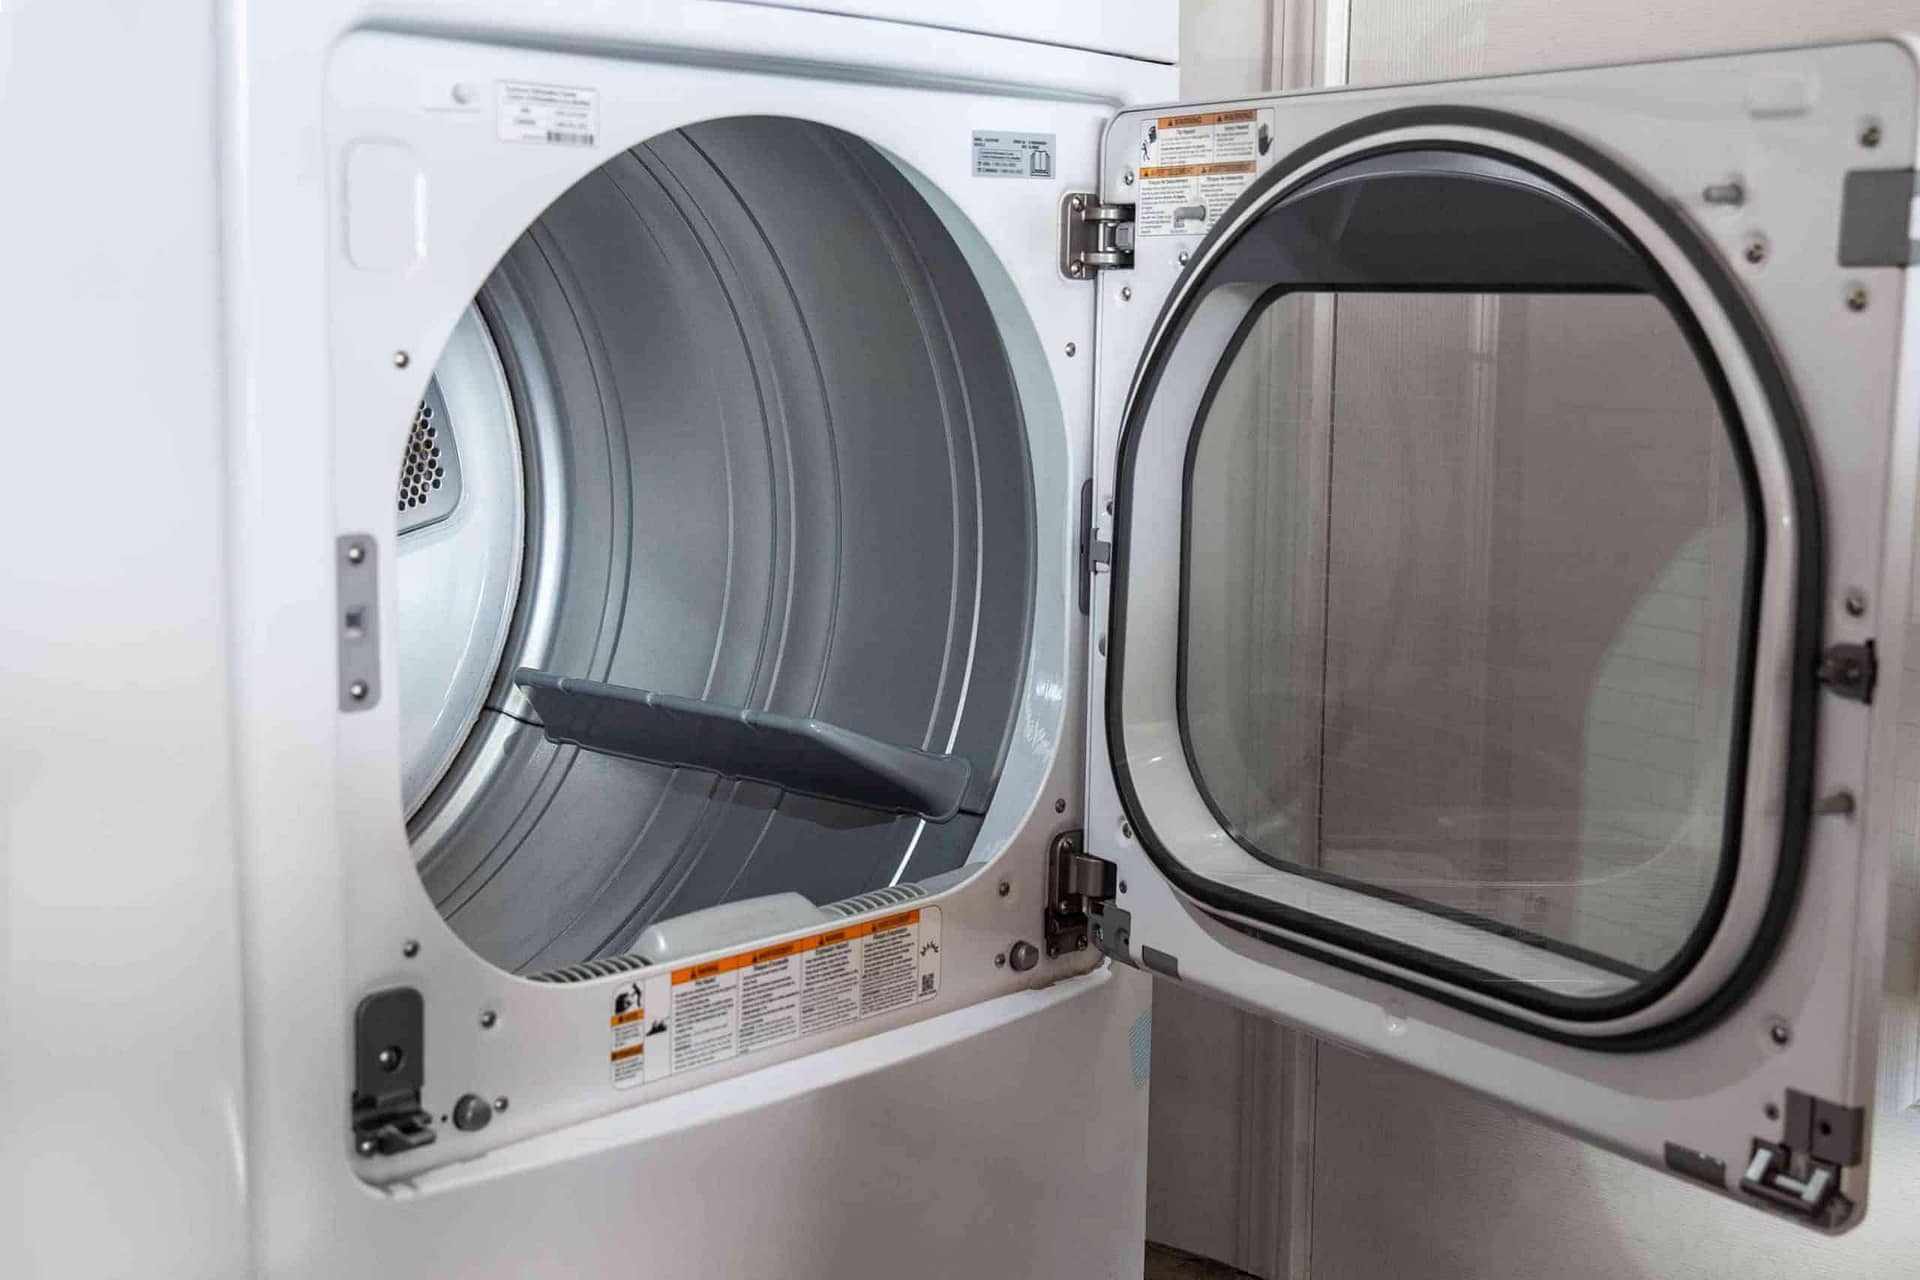 Hotpoint Dryer Not Heating: Causes & 6 Ways to Fix it Now